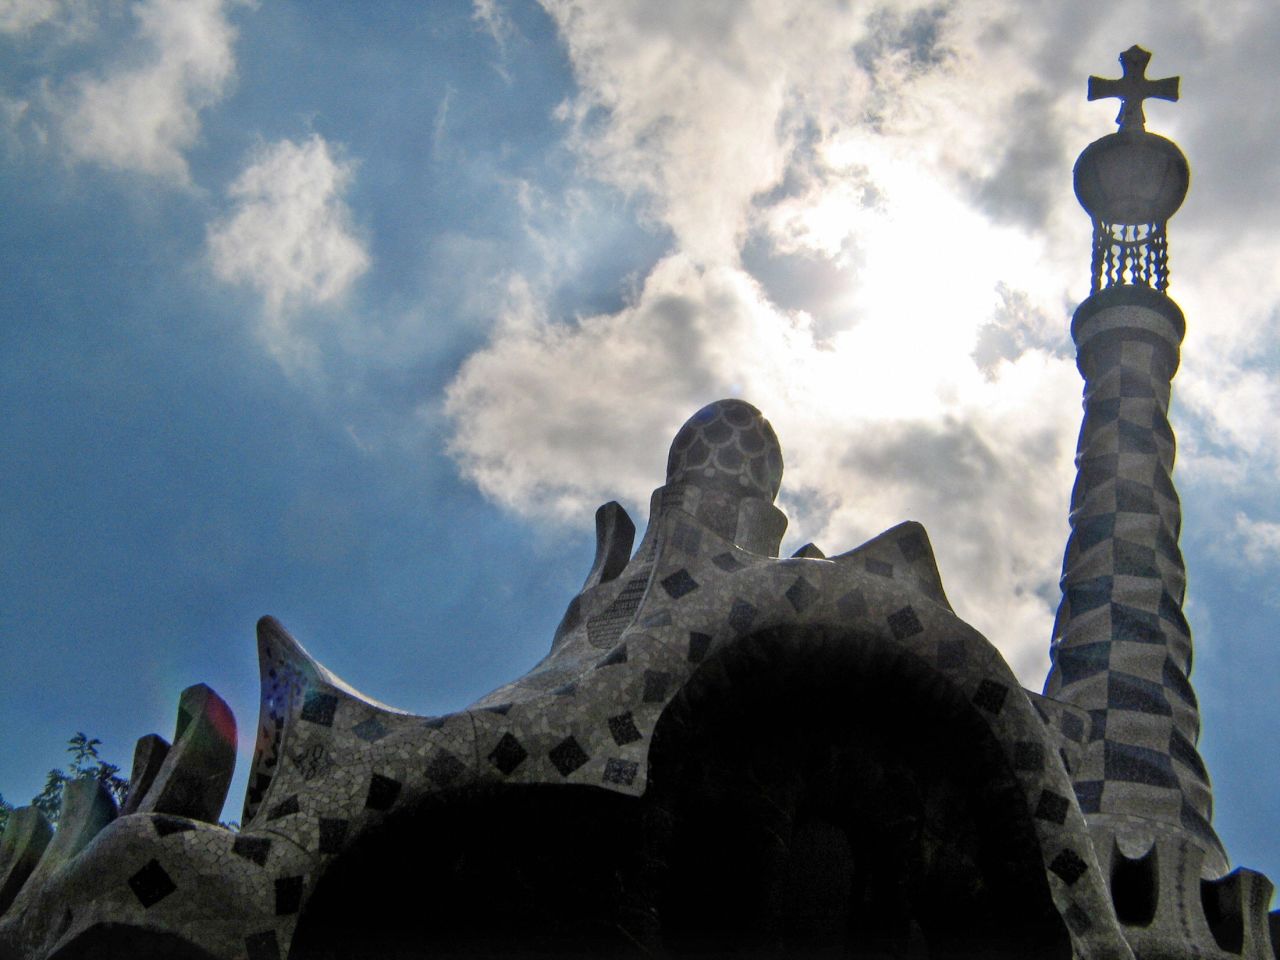 <strong>Park Guell, Barcelona: </strong>The city's Park Guell is designed by Antoni Gaudí, the modernist architect. It's a great place for basking in the sun and enjoying the unique structures.